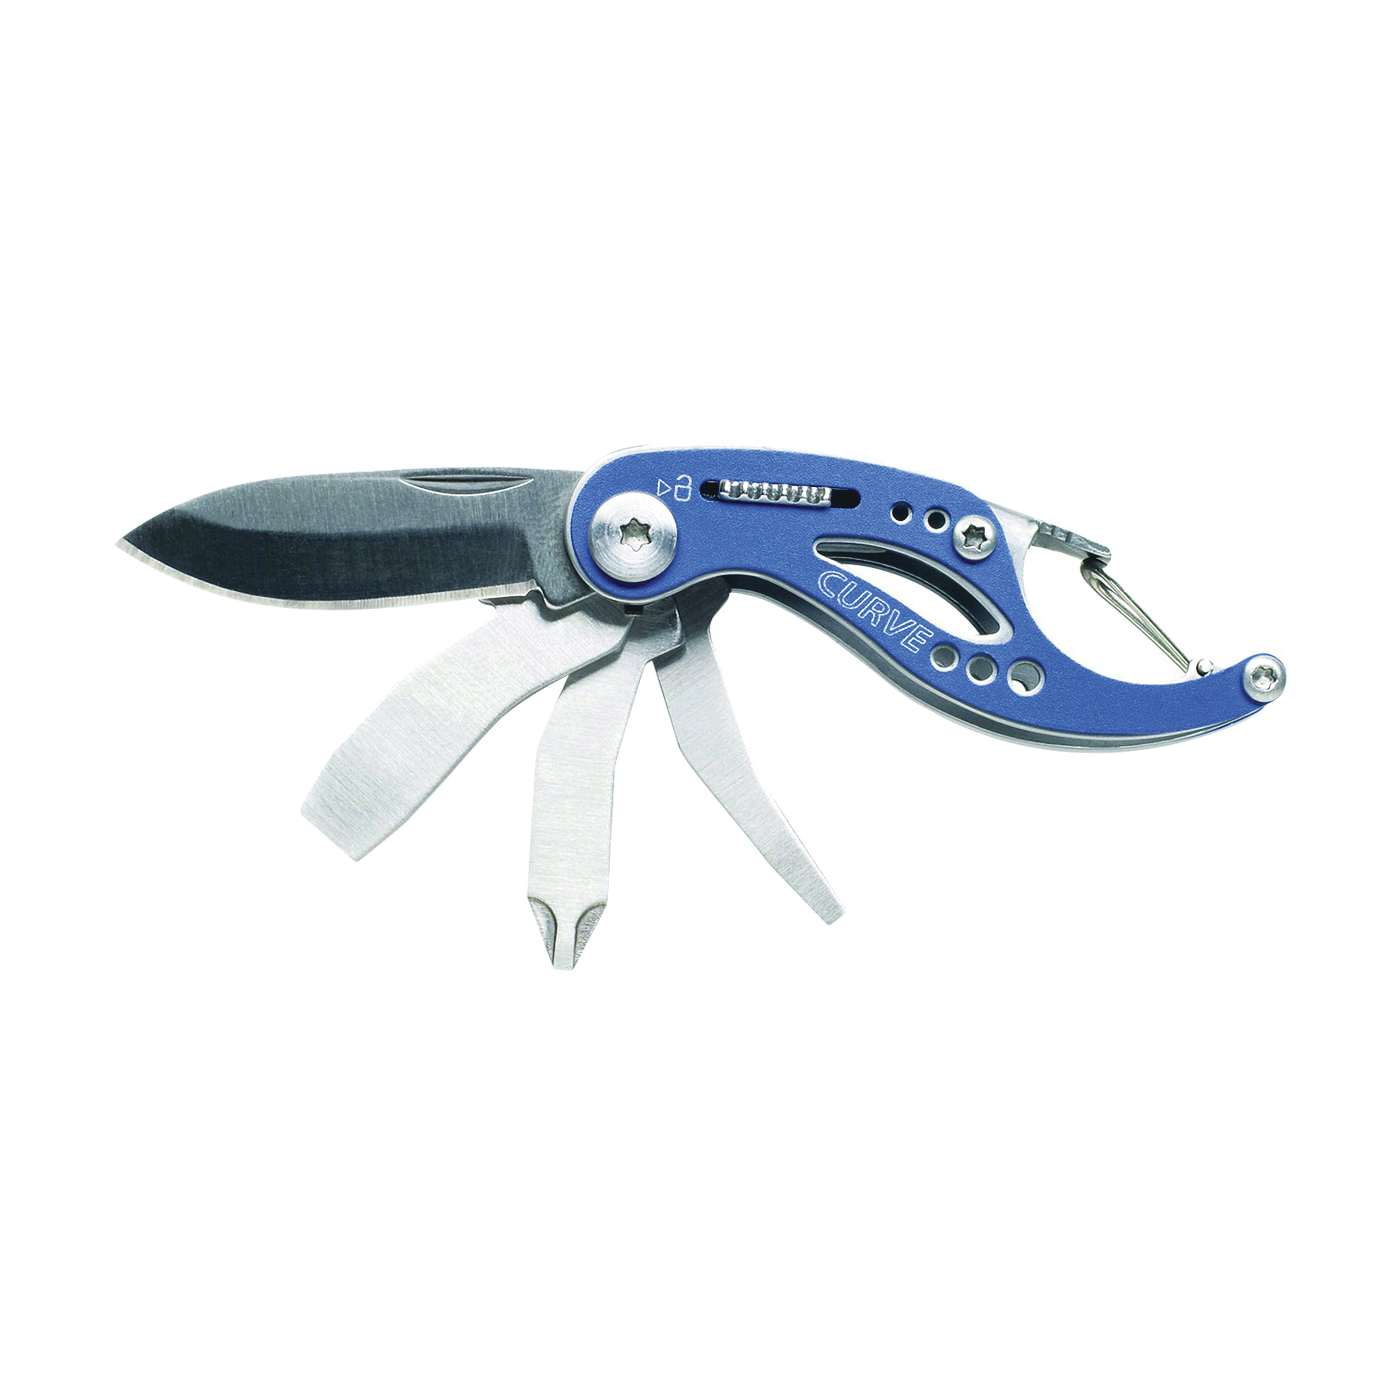 31-000116 Specialized Multi-Tool, 6-Function